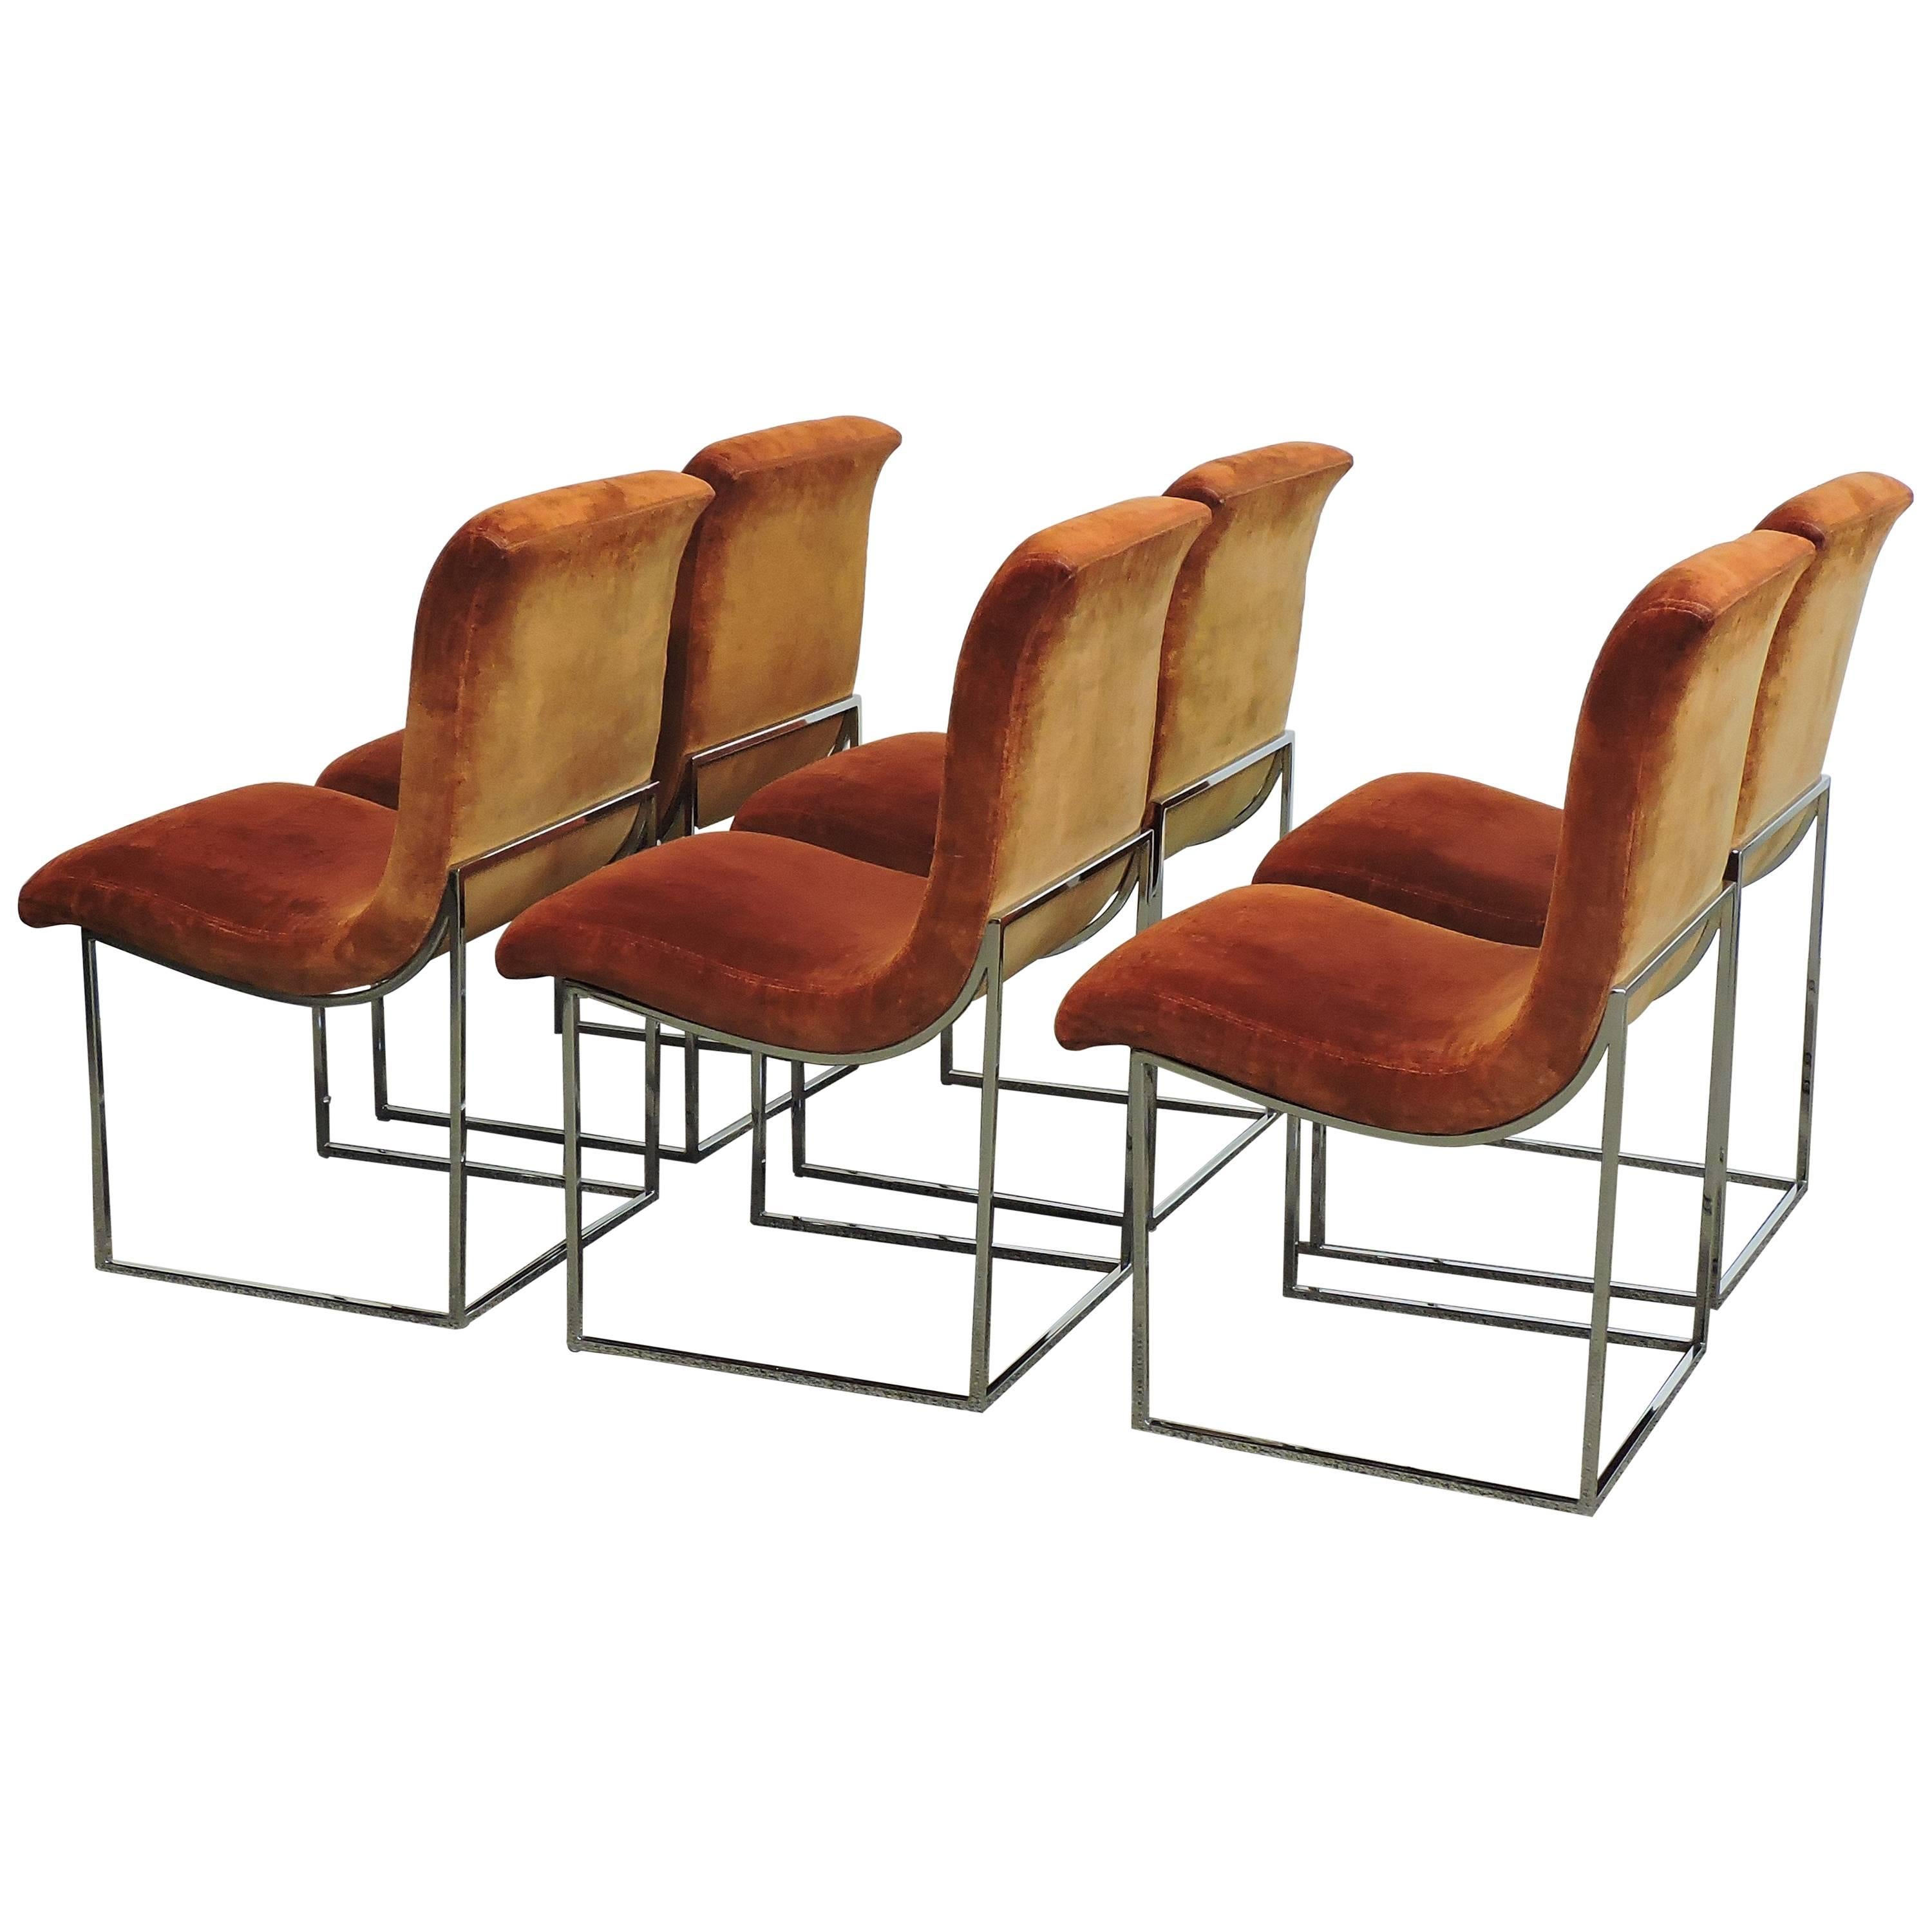 Six Milo Baughman Chrome Scoop Dining Chairs for Thayer Coggin